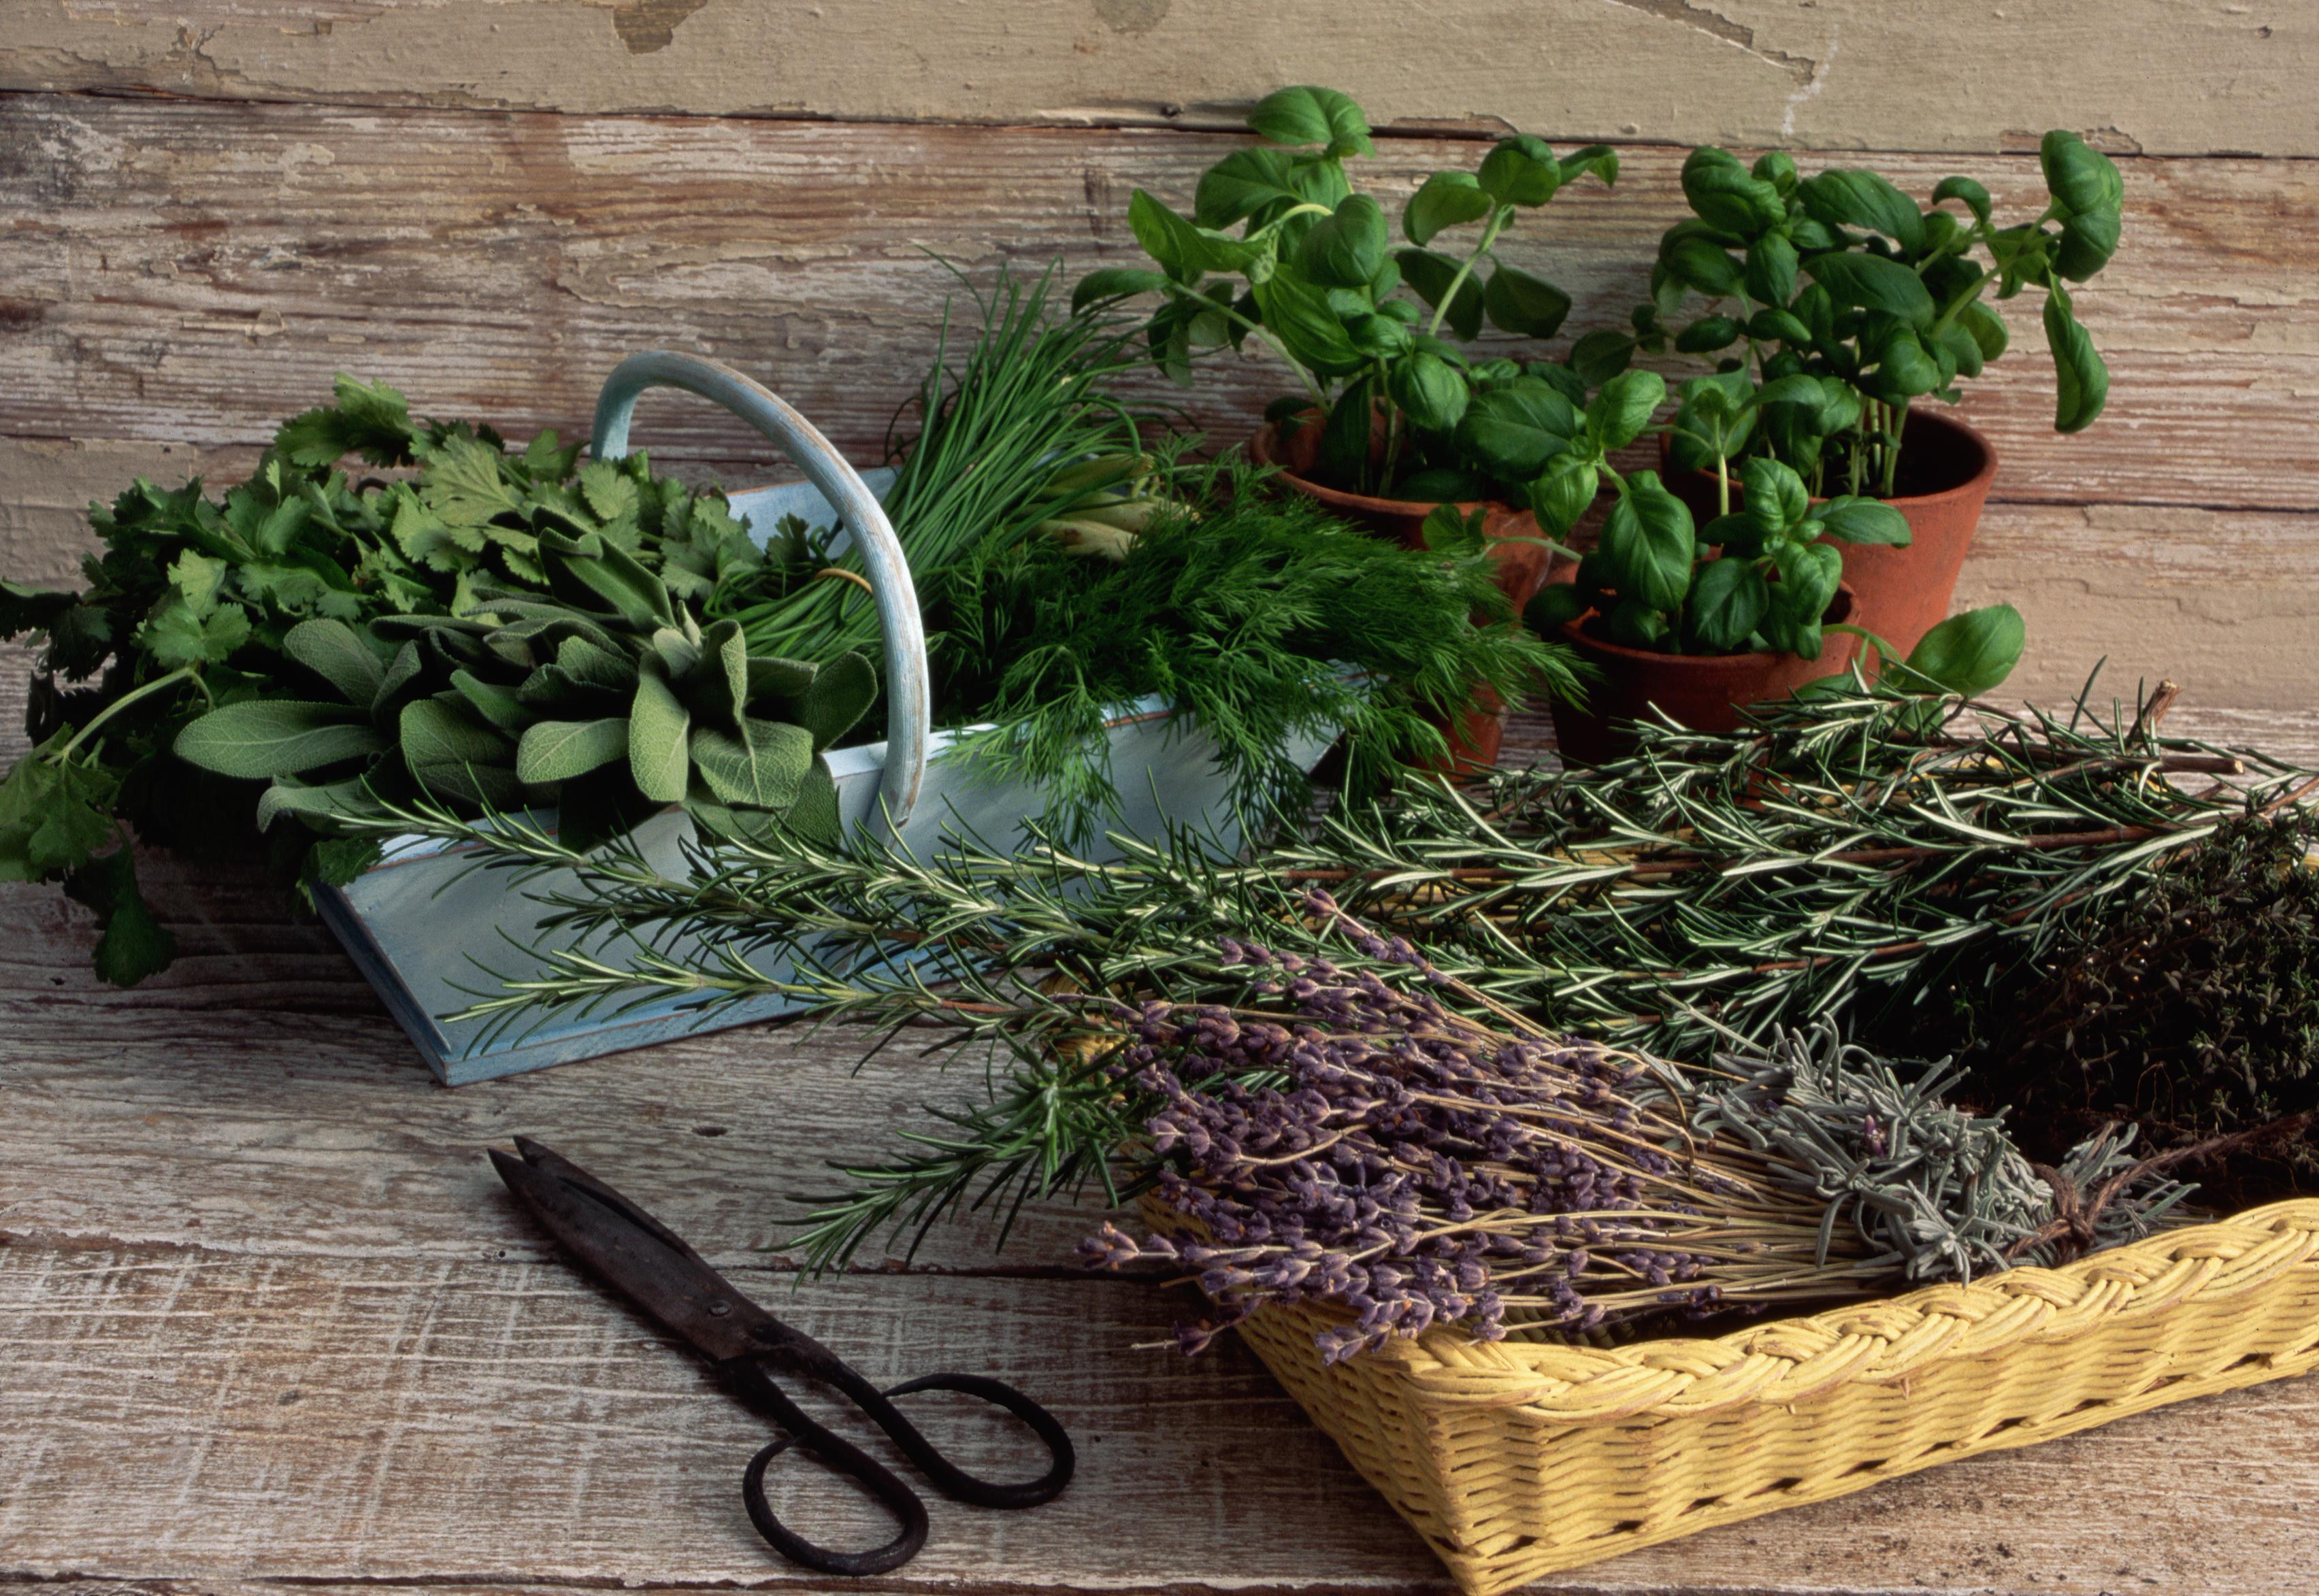  A table with an assortment of garden herbs in wicker baskets 